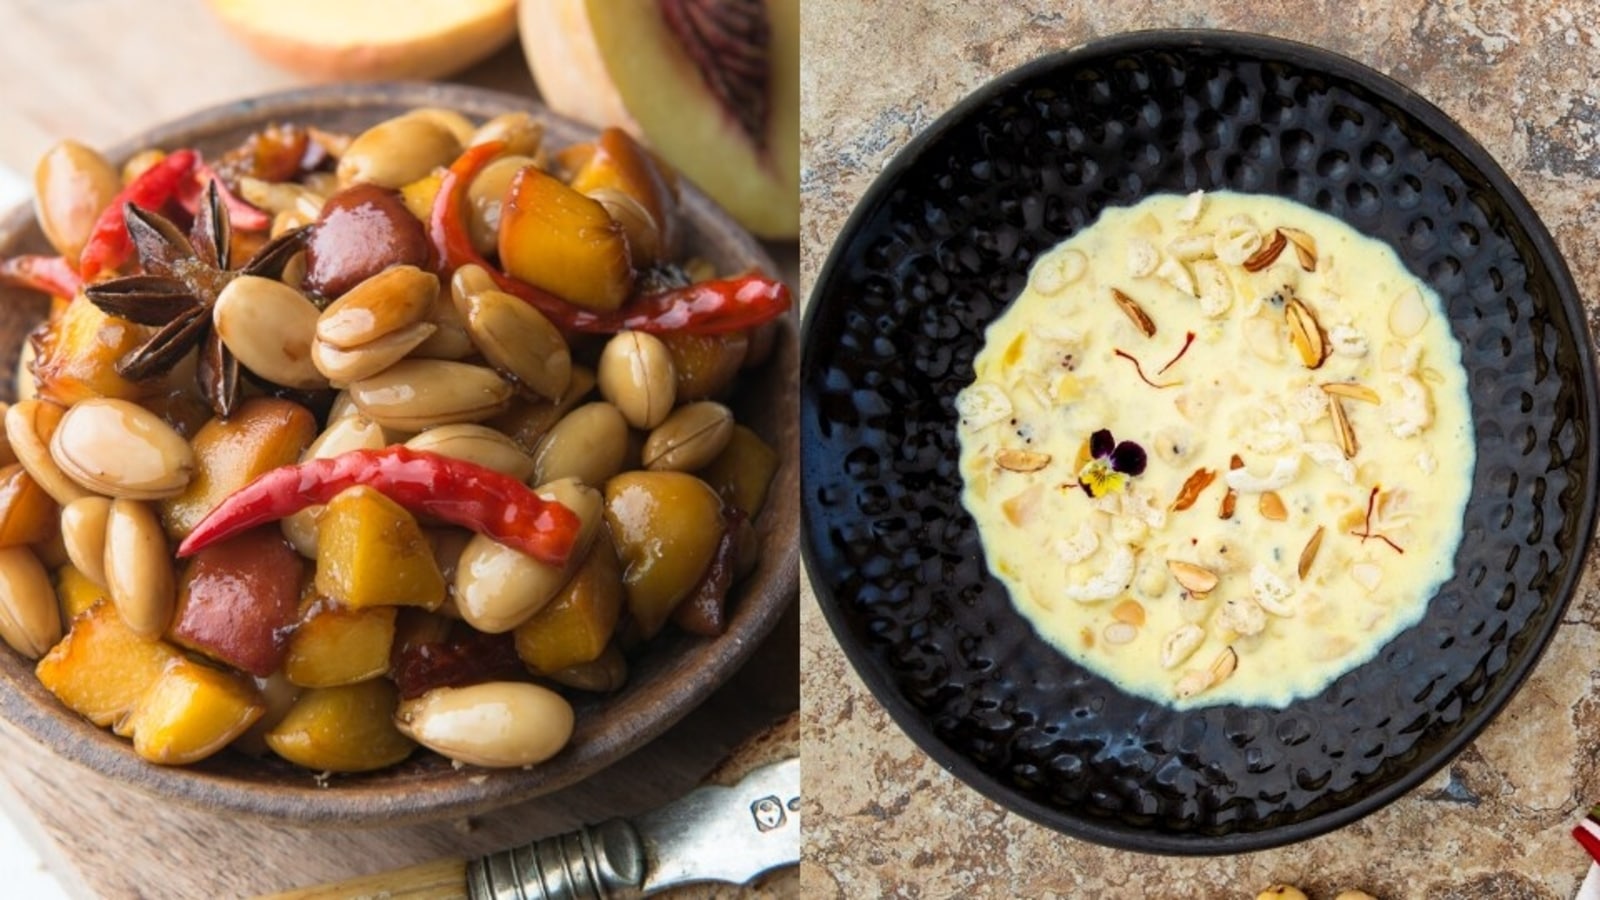 healthy-snacking-recipes-whip-up-almond-and-peach-relish-or-almond-and-makhana-kheer-in-just-20-minutes